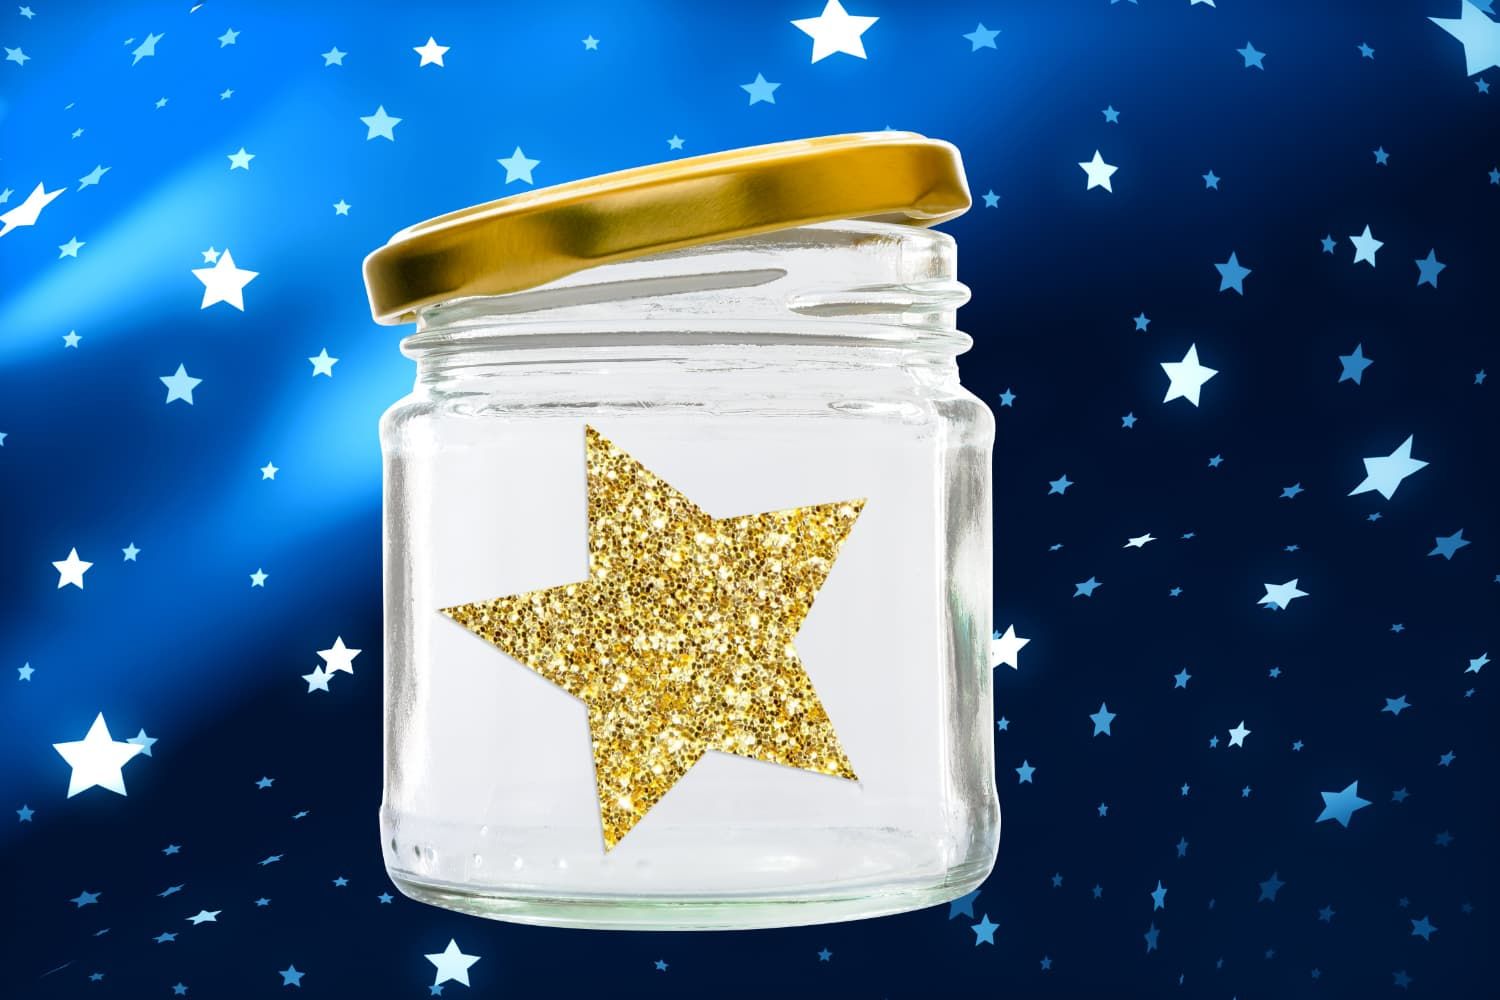 Object%20lesson%20-%20Stars%20in%20a%20jar-6132cbc5 Blessing